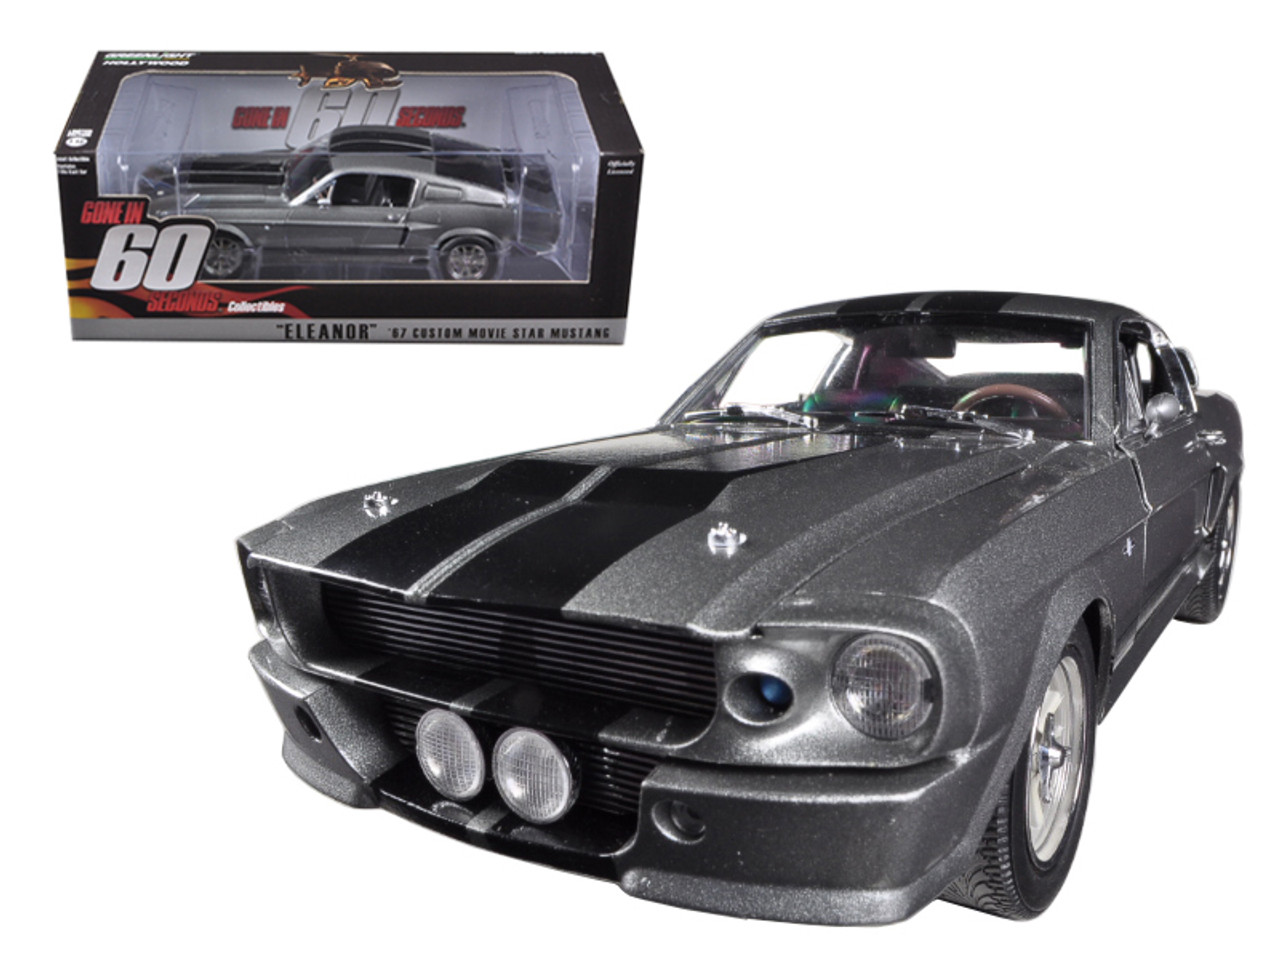 1/18 Greenlight 1967 Ford Mustang Custom "Eleanor" "Gone in 60 Seconds" (2000) Movie Diecast Car Model